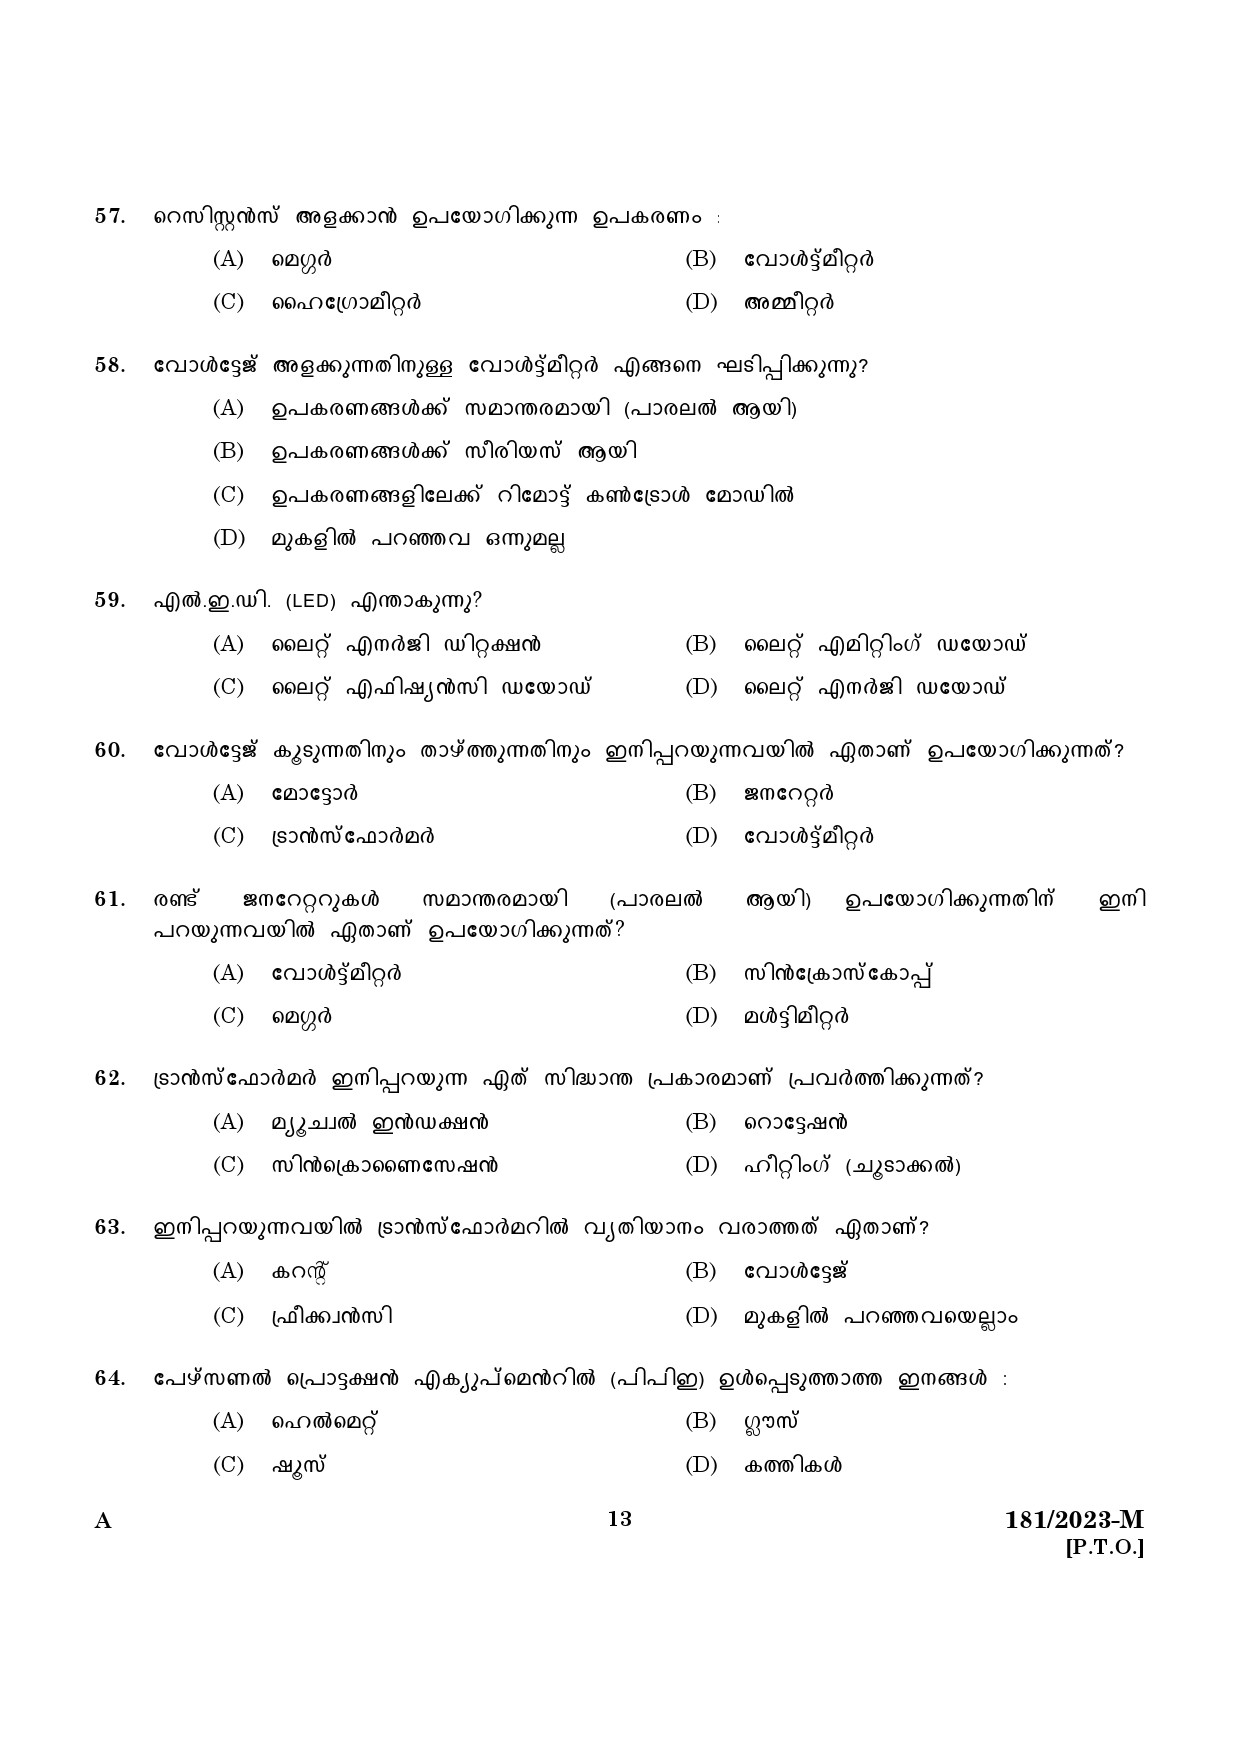 KPSC Forest Boat Driver Malayalam Exam 2023 Code 1812023 M 11